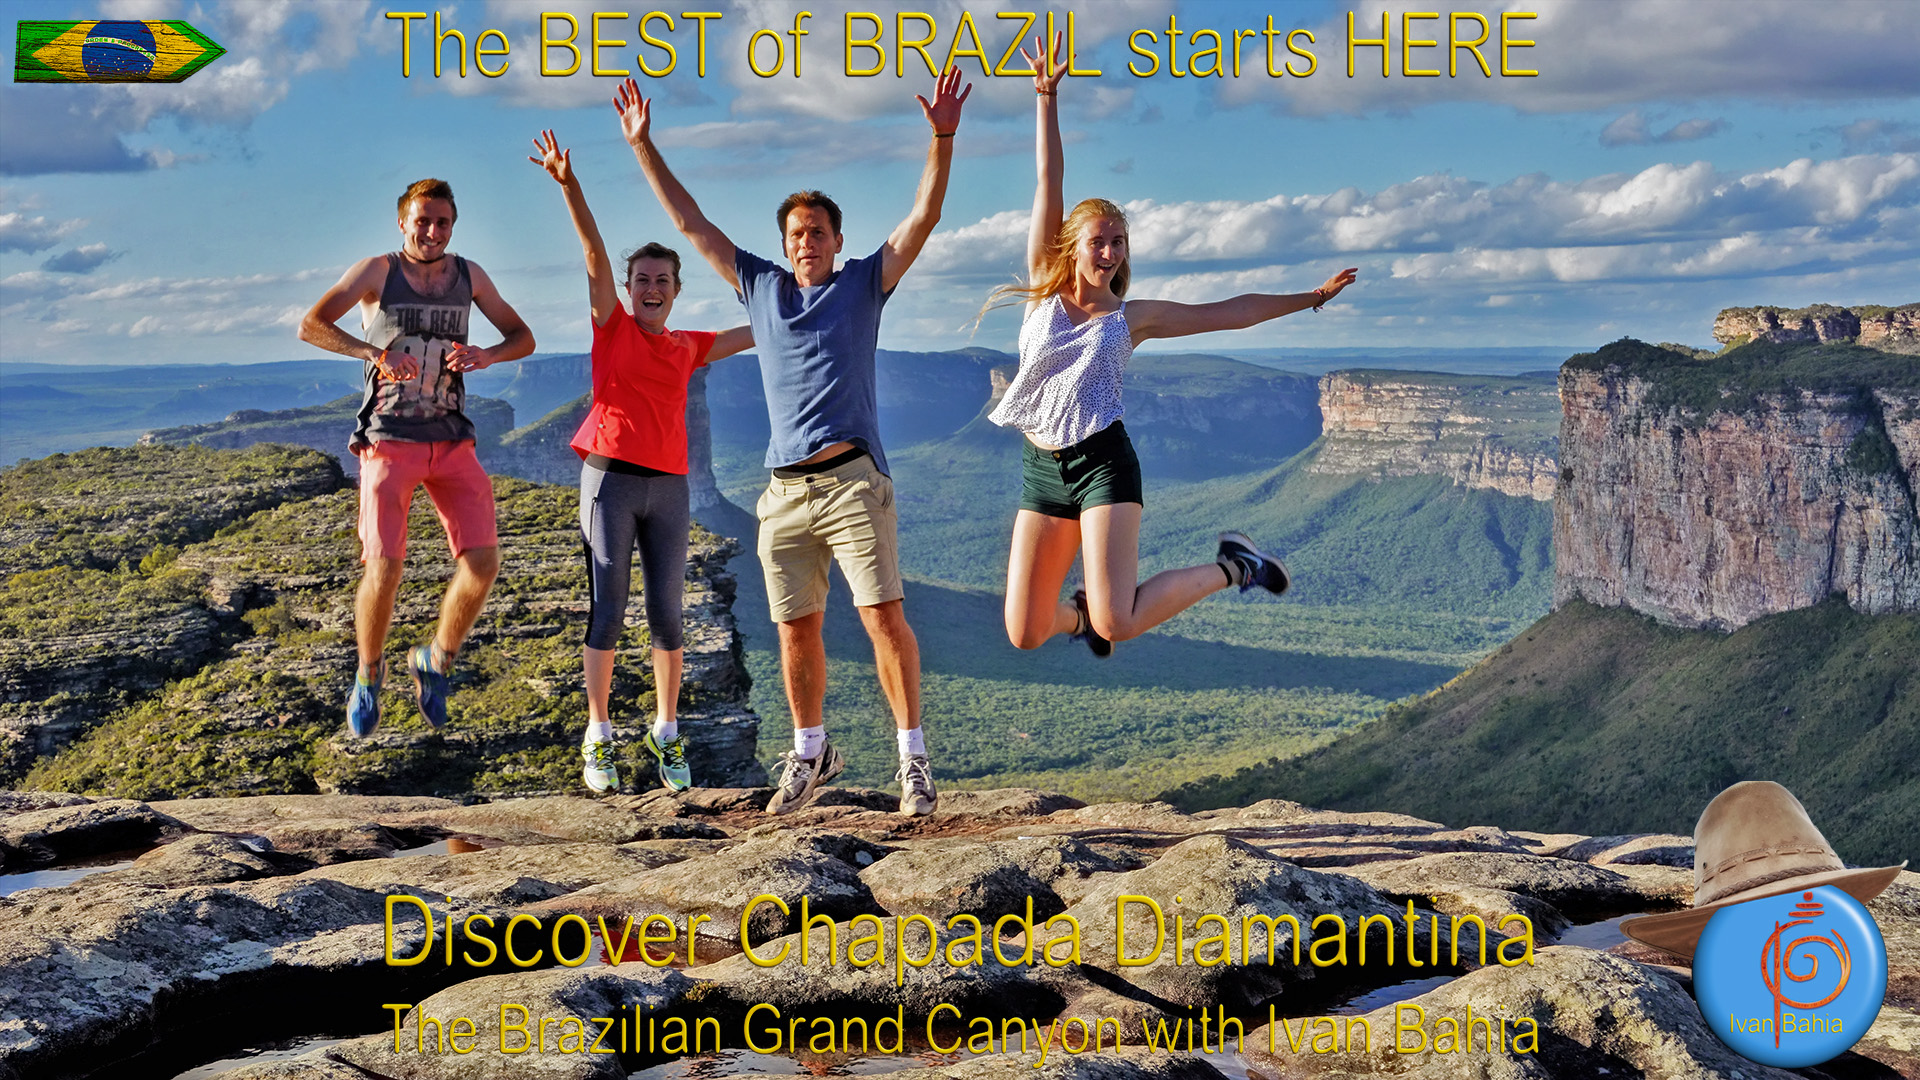 Discover Bahia with Ivan Bahia, the top private tour-guide & travel agency in Brazil, for your best experience (in English - Français - Nederlands) in Salvador, experience Chapada Diamantina National Park, All Saints Bay, Cachoeira, Recôncavo Baiano, Praia do Forte, Coconut coast and Bahia /NE-Brazil  #ivanbahia #ivanbahiaguide #ivanbahiatravelguide #fotoschapadadiamantina #ibg #ibtg #guiachapadadiamantina #toursbylocals #chapadadiamantinaguide #chapadadiamantina #chapadaexperience #lencoistomorrodesaopaulo #voyagebresil #bresilessentiel #diamantinamountains #chapadadiamantinatrekking #lencois #lençois #brazilhoneymoon #yourtourbrazil #yourtoursbrazil #bahiaguide #bahiametisse #transatjacquesvabres #sailingbrazil #yourtoursbrazil #gaytravelbrazil #morrodopaiinacio #FotosChapadaDiamantina #BahiaTourism #SalvadorBahiaTravel #tripadvisorsalvador #tripadvisorbahia #voyagegay #voyagelgbt #gayvoyageur #gayvoyages #gaytravelbrazil #lgbtq+friendly #gaytravelinfo #gayhoneymoon #gayholiday #lgbttravel #lgbtqfriendly #lgbttourism #lgbtq #lgbtqtravel #gayworldwide #gaytravelguide #gaytravelinsta #gayworld #gaystraveltoo #thegaypassport #gaytravelers #wearetravelgays #gaycation #gaytravellers #gaytravel #gaytravelinsta #gaytourist #lgbtqtravelers #instagay 